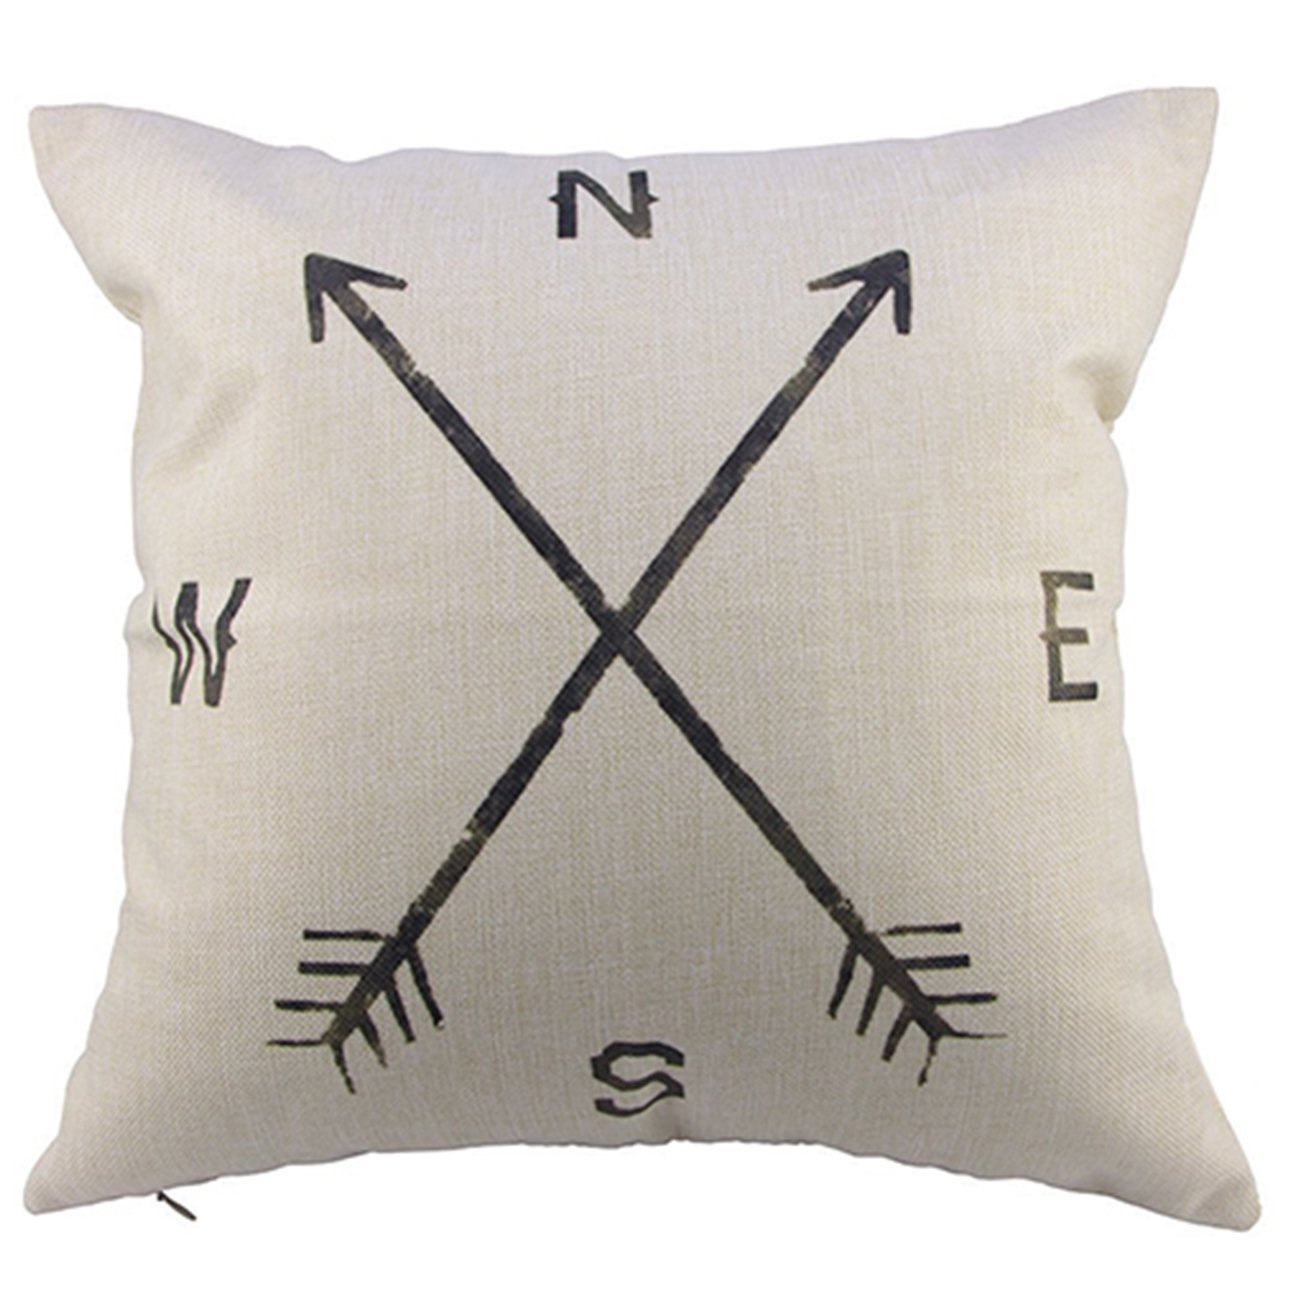 Throw Pillow Covers From $1.40 + FREE Shipping!